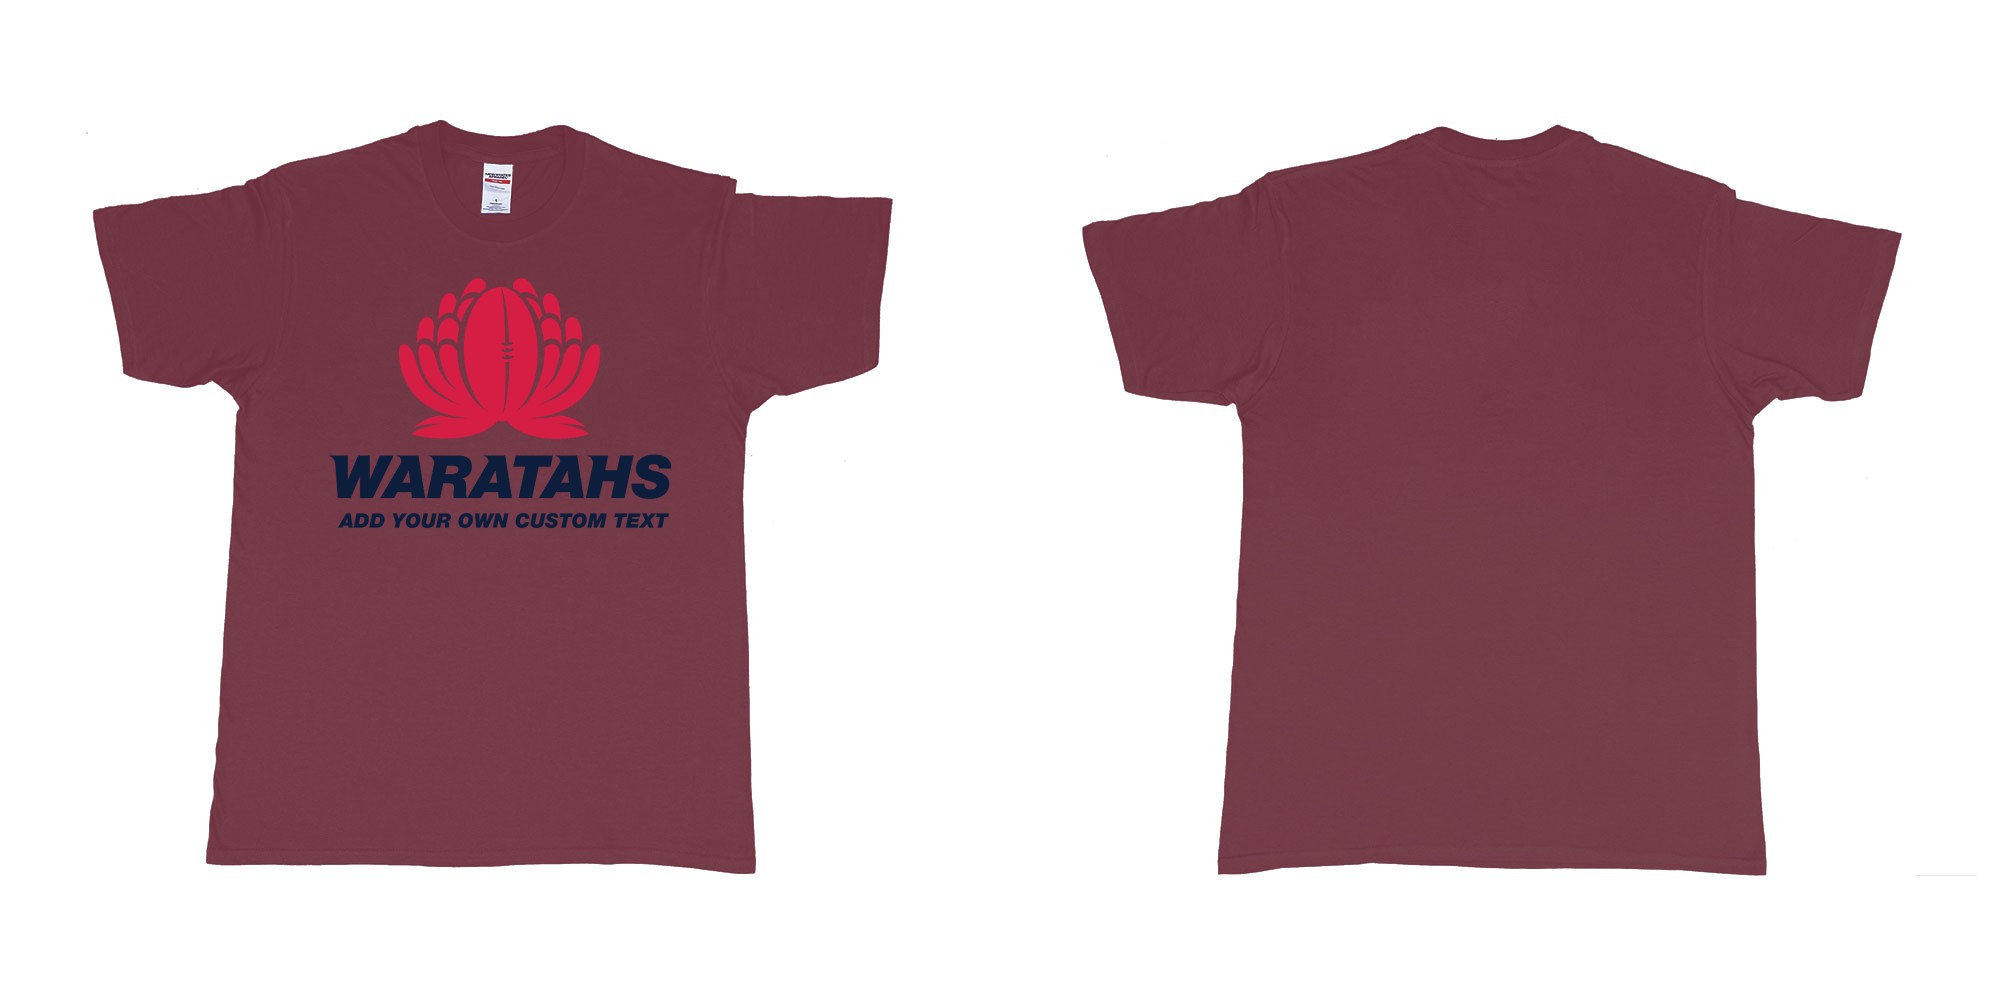 Custom tshirt design new south wales waratahs custom teeshirt in fabric color marron choice your own text made in Bali by The Pirate Way